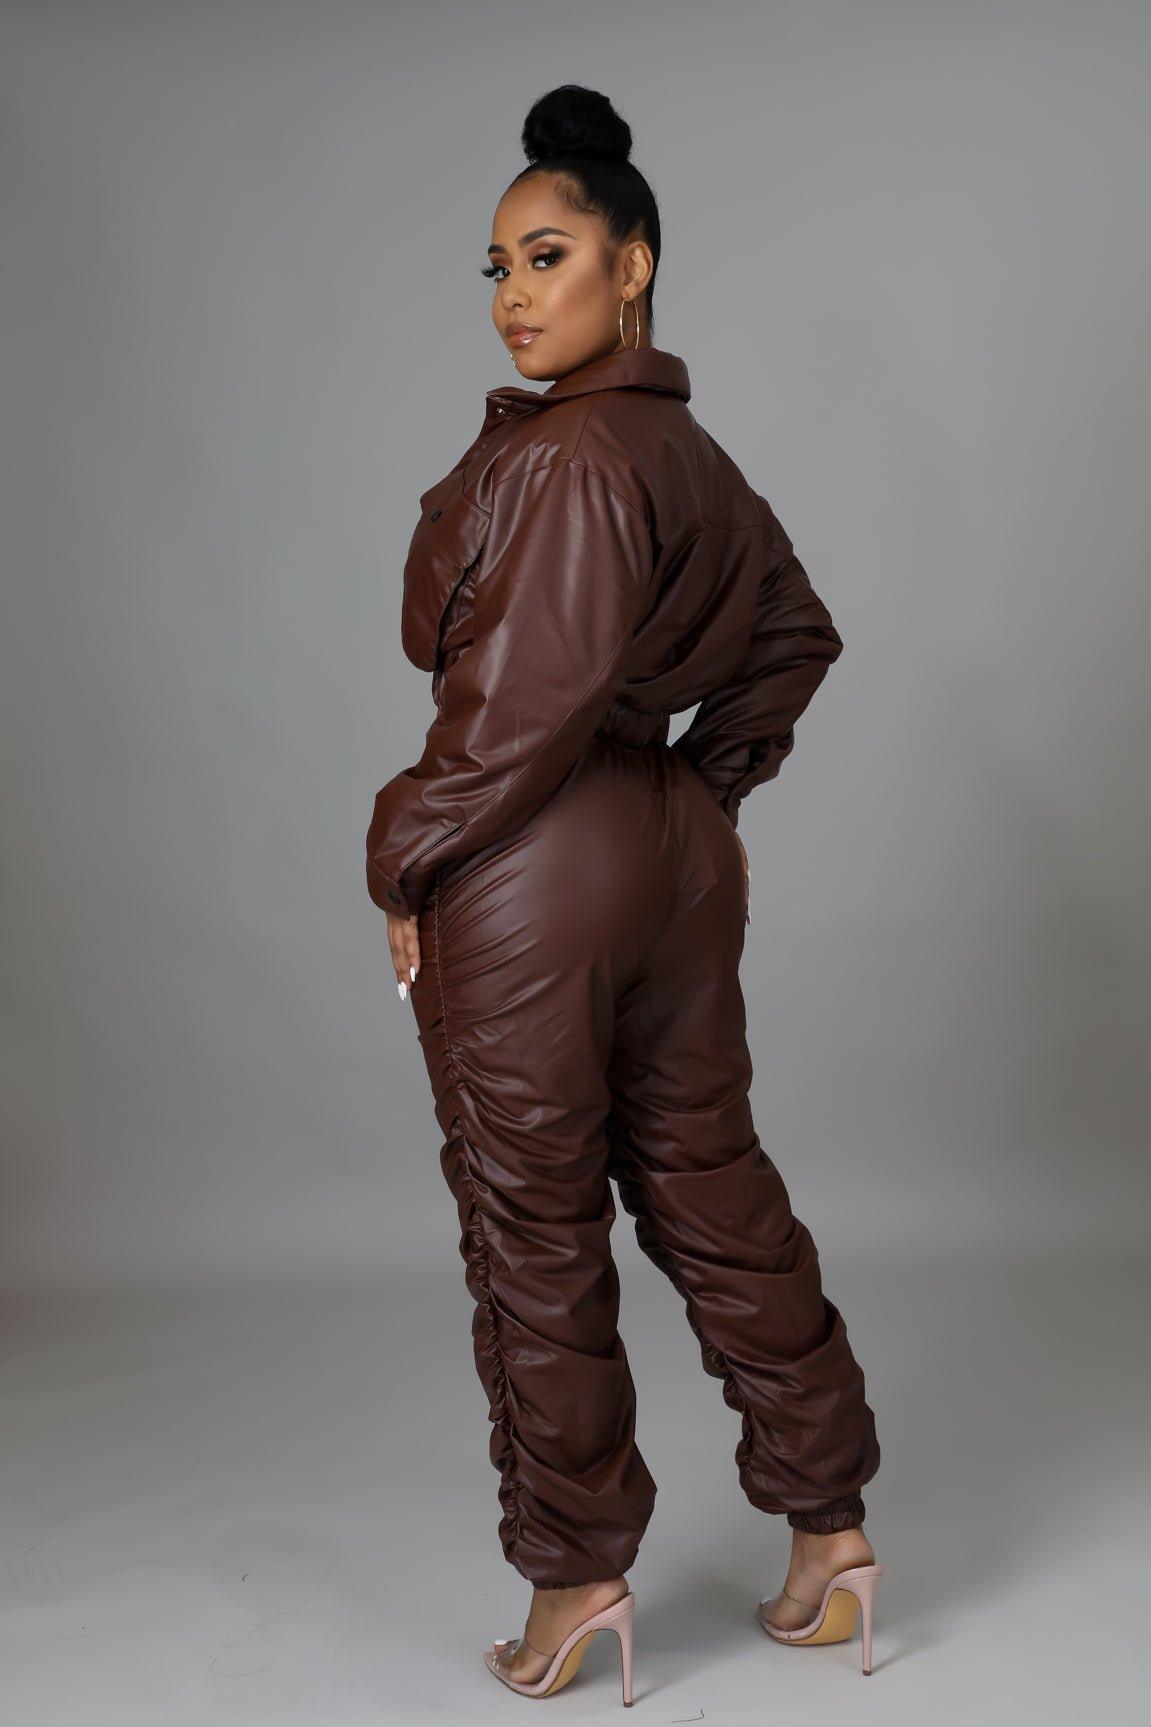 Reagan Pants Faux Leather Set - MY SEXY STYLES